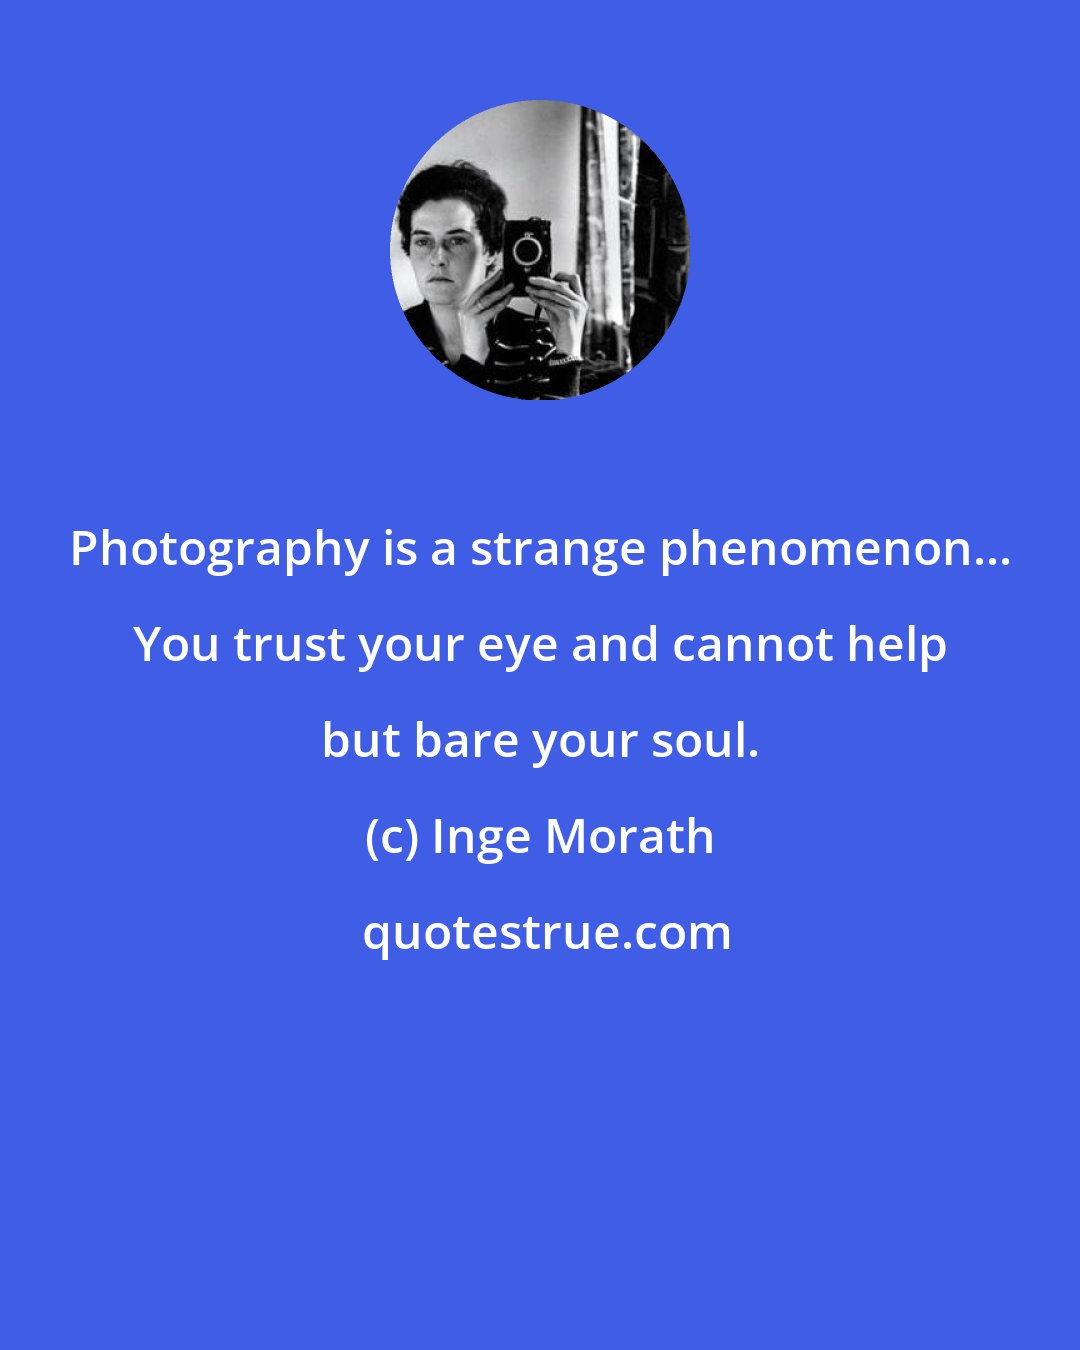 Inge Morath: Photography is a strange phenomenon... You trust your eye and cannot help but bare your soul.